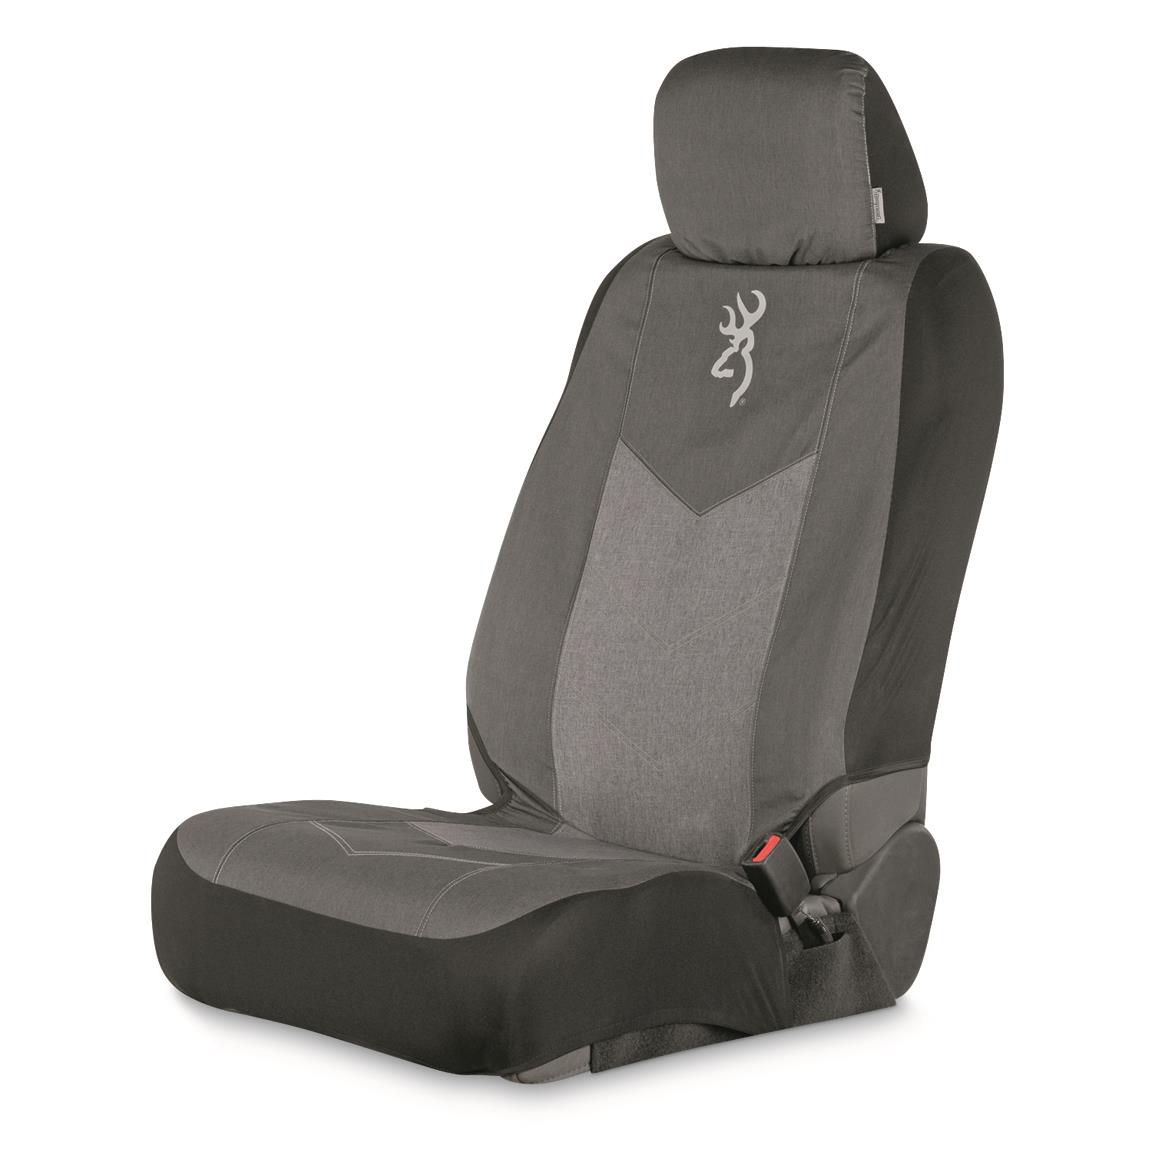 Browning Chevron Low Back Seat Cover, Black/Gray